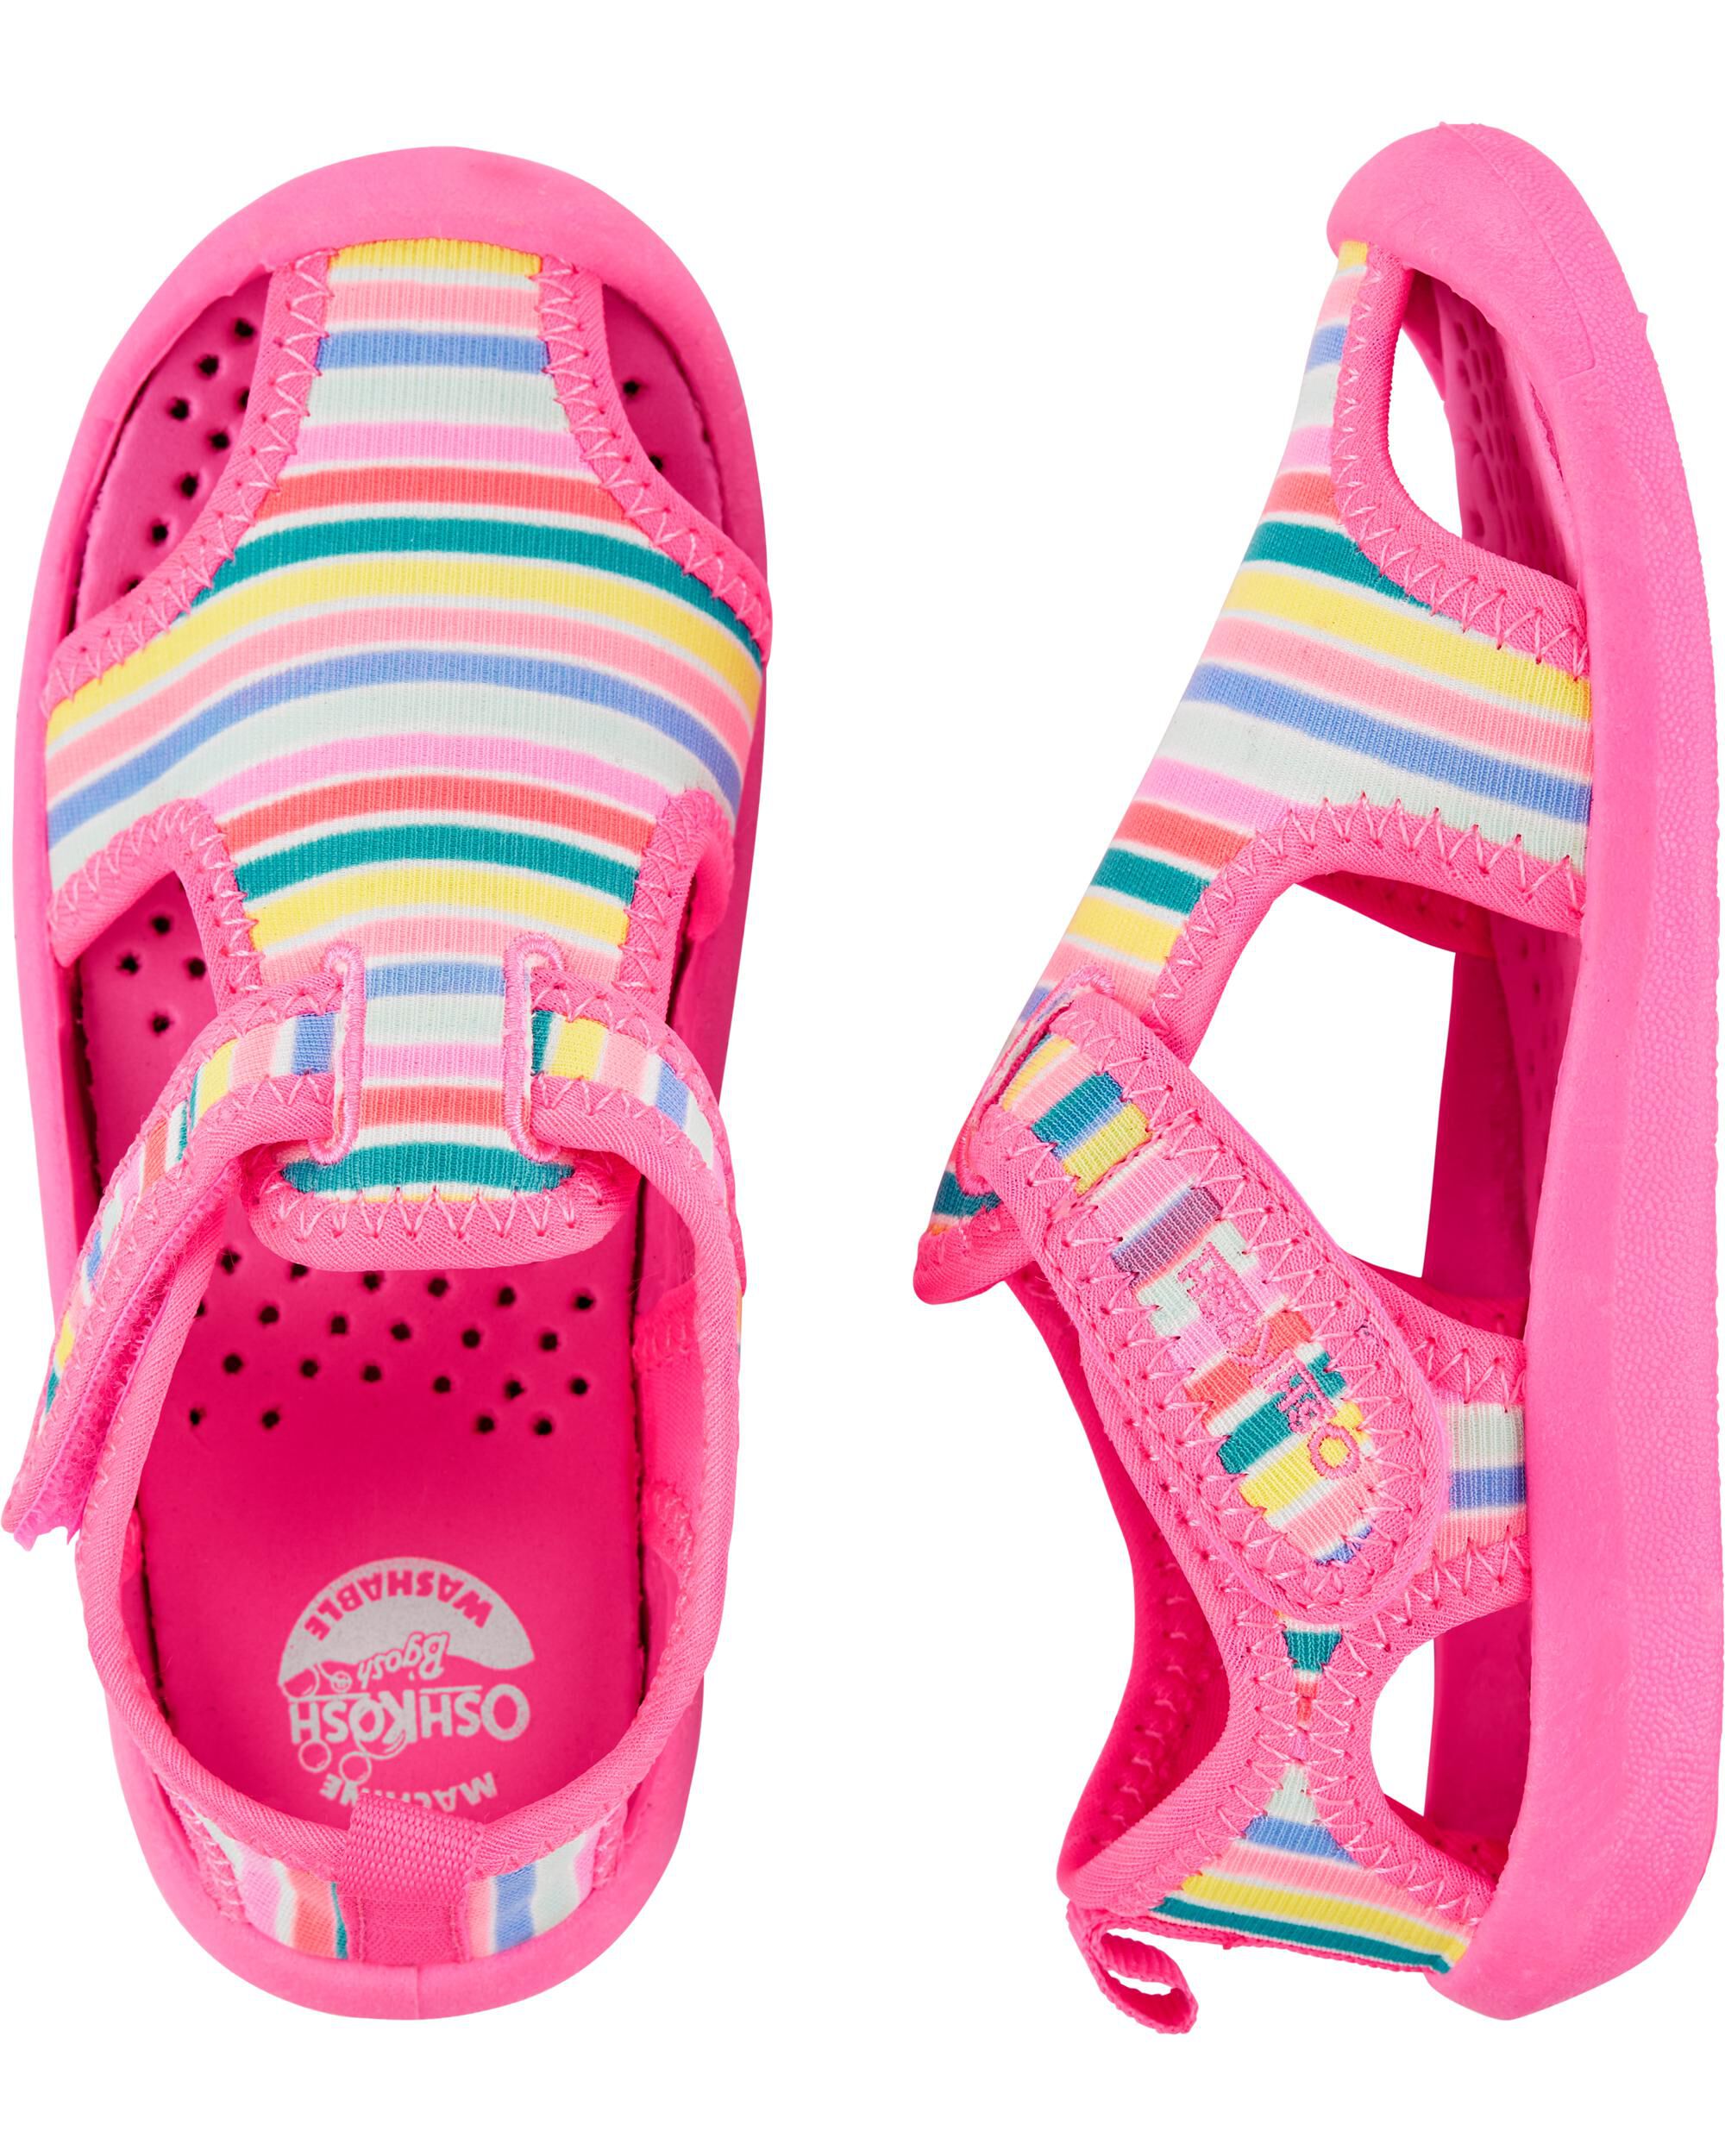 water shoes for toddlers girl